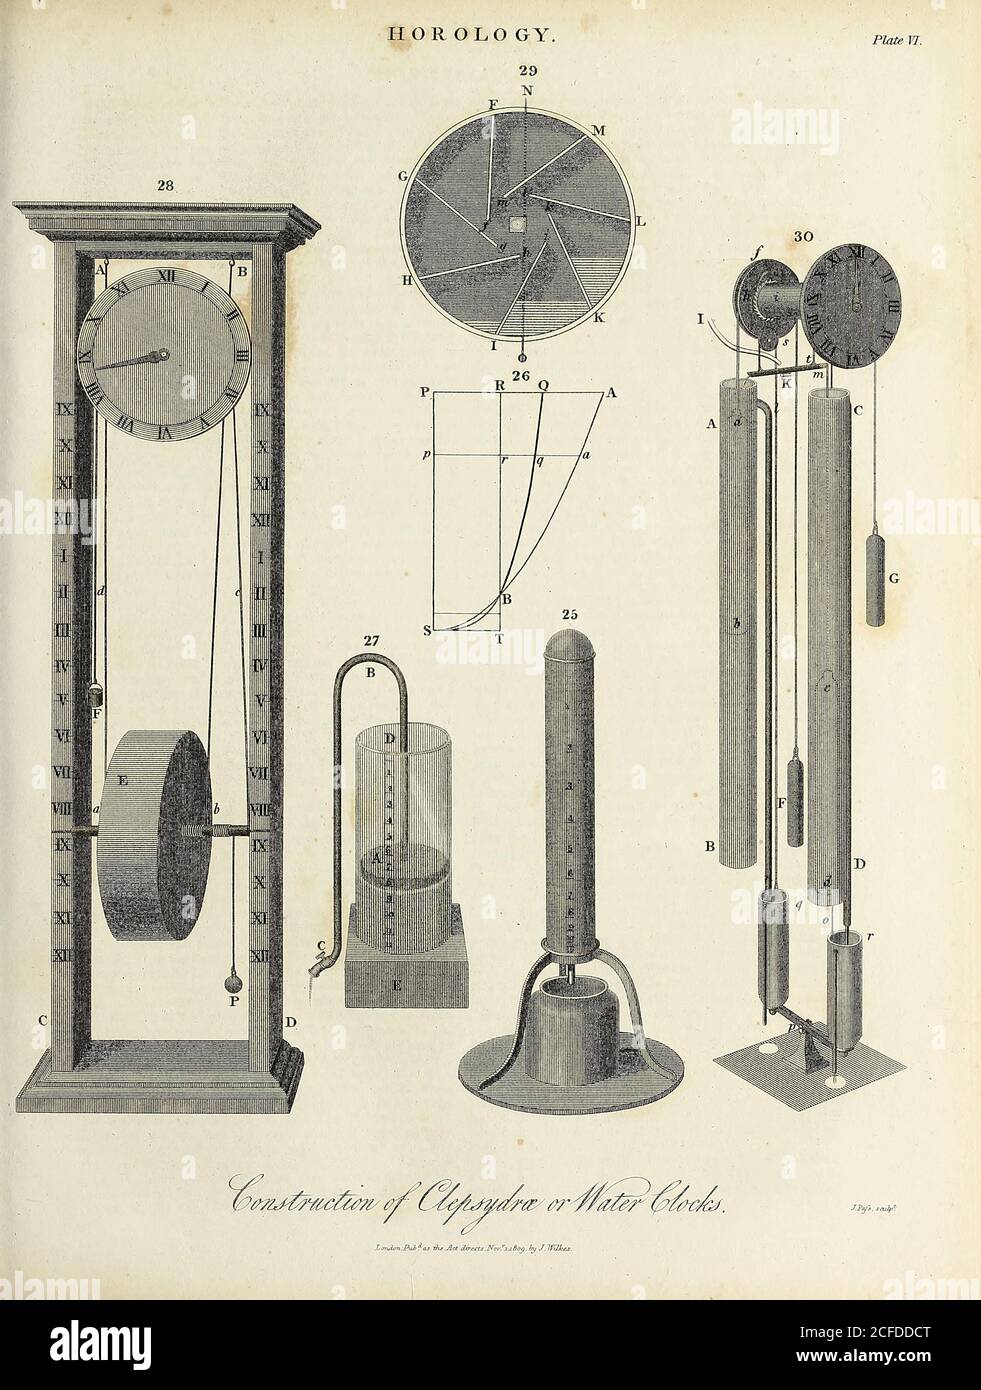 Construction of clepsydra [water clock]. Horology [study of the measurement of time. Clocks, watches, clockwork, sundials, hourglasses, clepsydras, timers, time recorders, marine chronometers]. Copperplate engraving By J. Pafs From the Encyclopaedia Londinensis or, Universal dictionary of arts, sciences, and literature; Volume X;  Edited by Wilkes, John. Published in London in 1811 Stock Photo